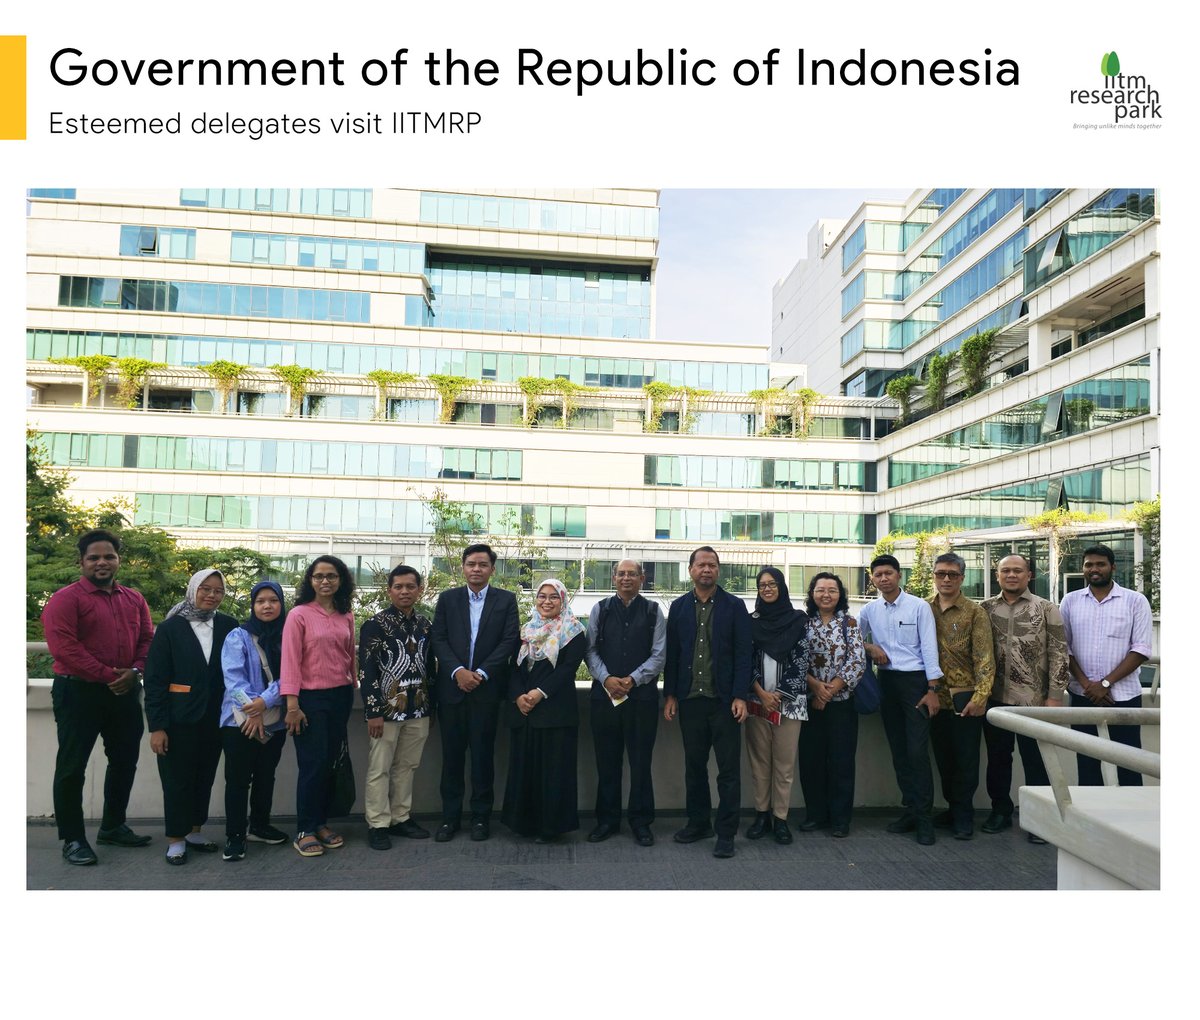 It was our pleasure to host a delegation representing the Government of the Republic of Indonesia at the @iitm_respark. During their time at the Research Park, we had the opportunity to present an overview of our R&D & innovation ecosystem & @IITMIC Here's a glimpse of the visit!